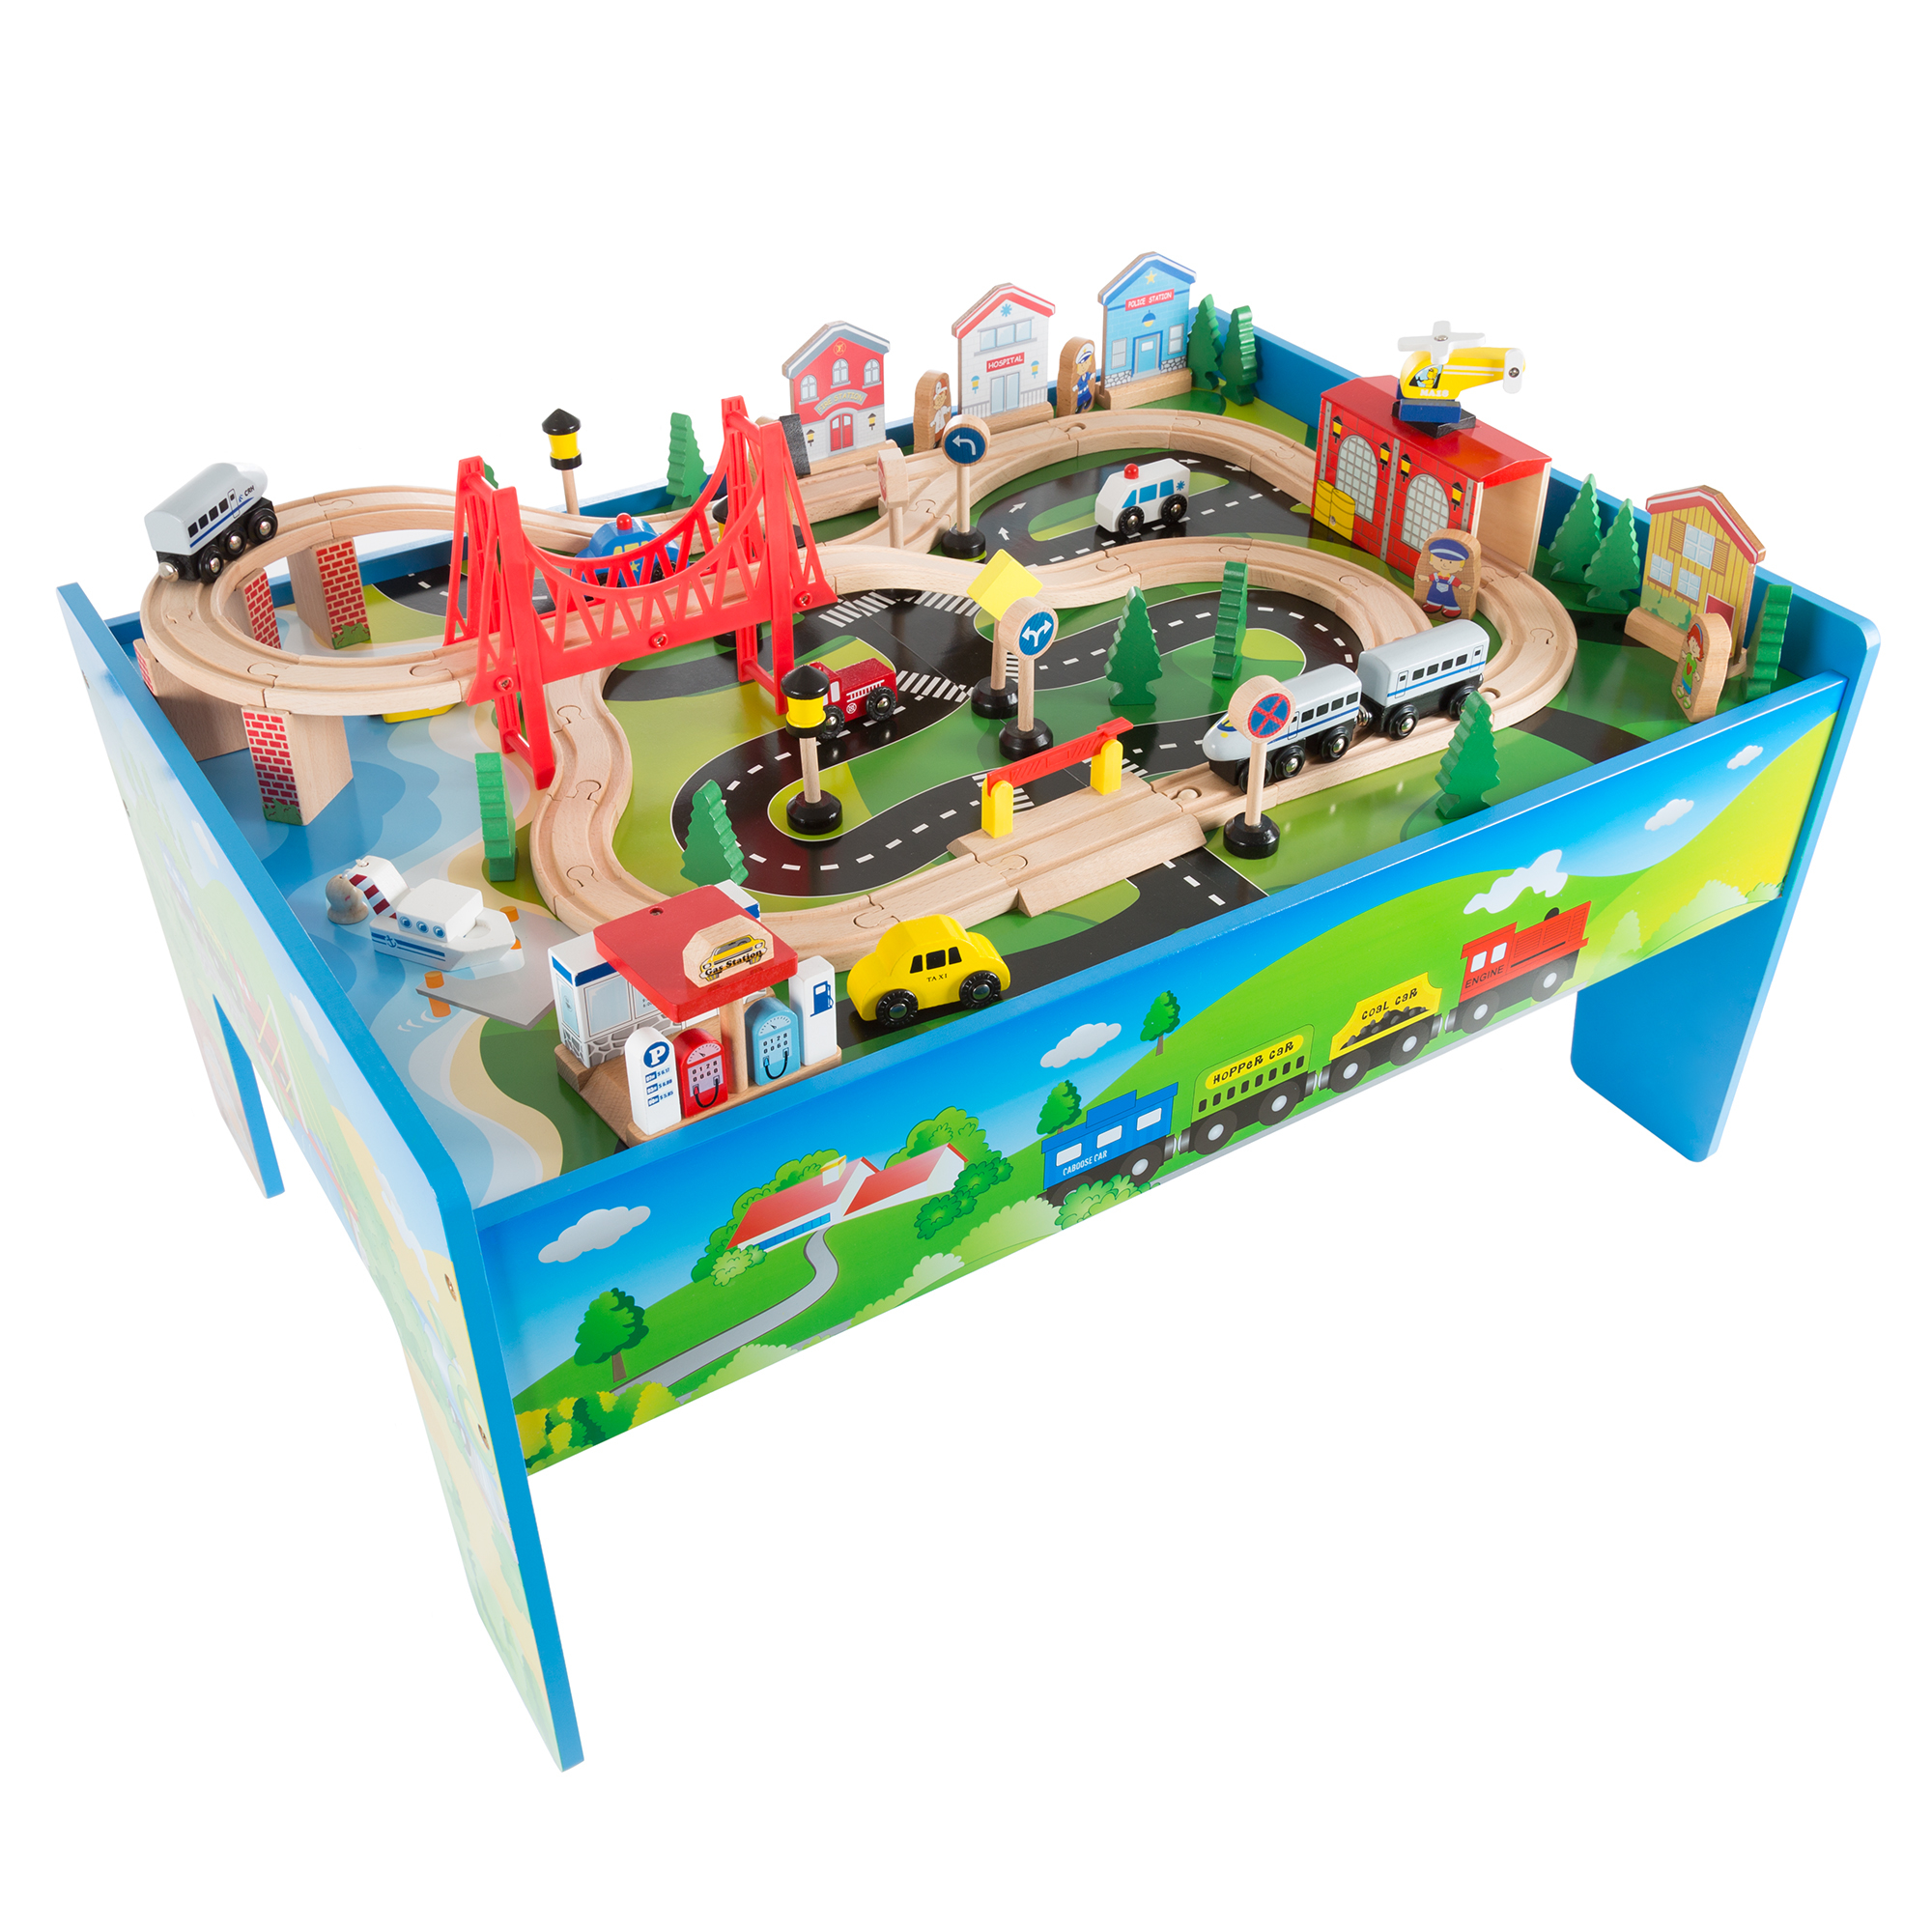 Kids Toys Play 75 Pc Train Set Wooden Table 32 X 23 X 15 Road And Water Scene Toddlers Boys Girls No Batteries